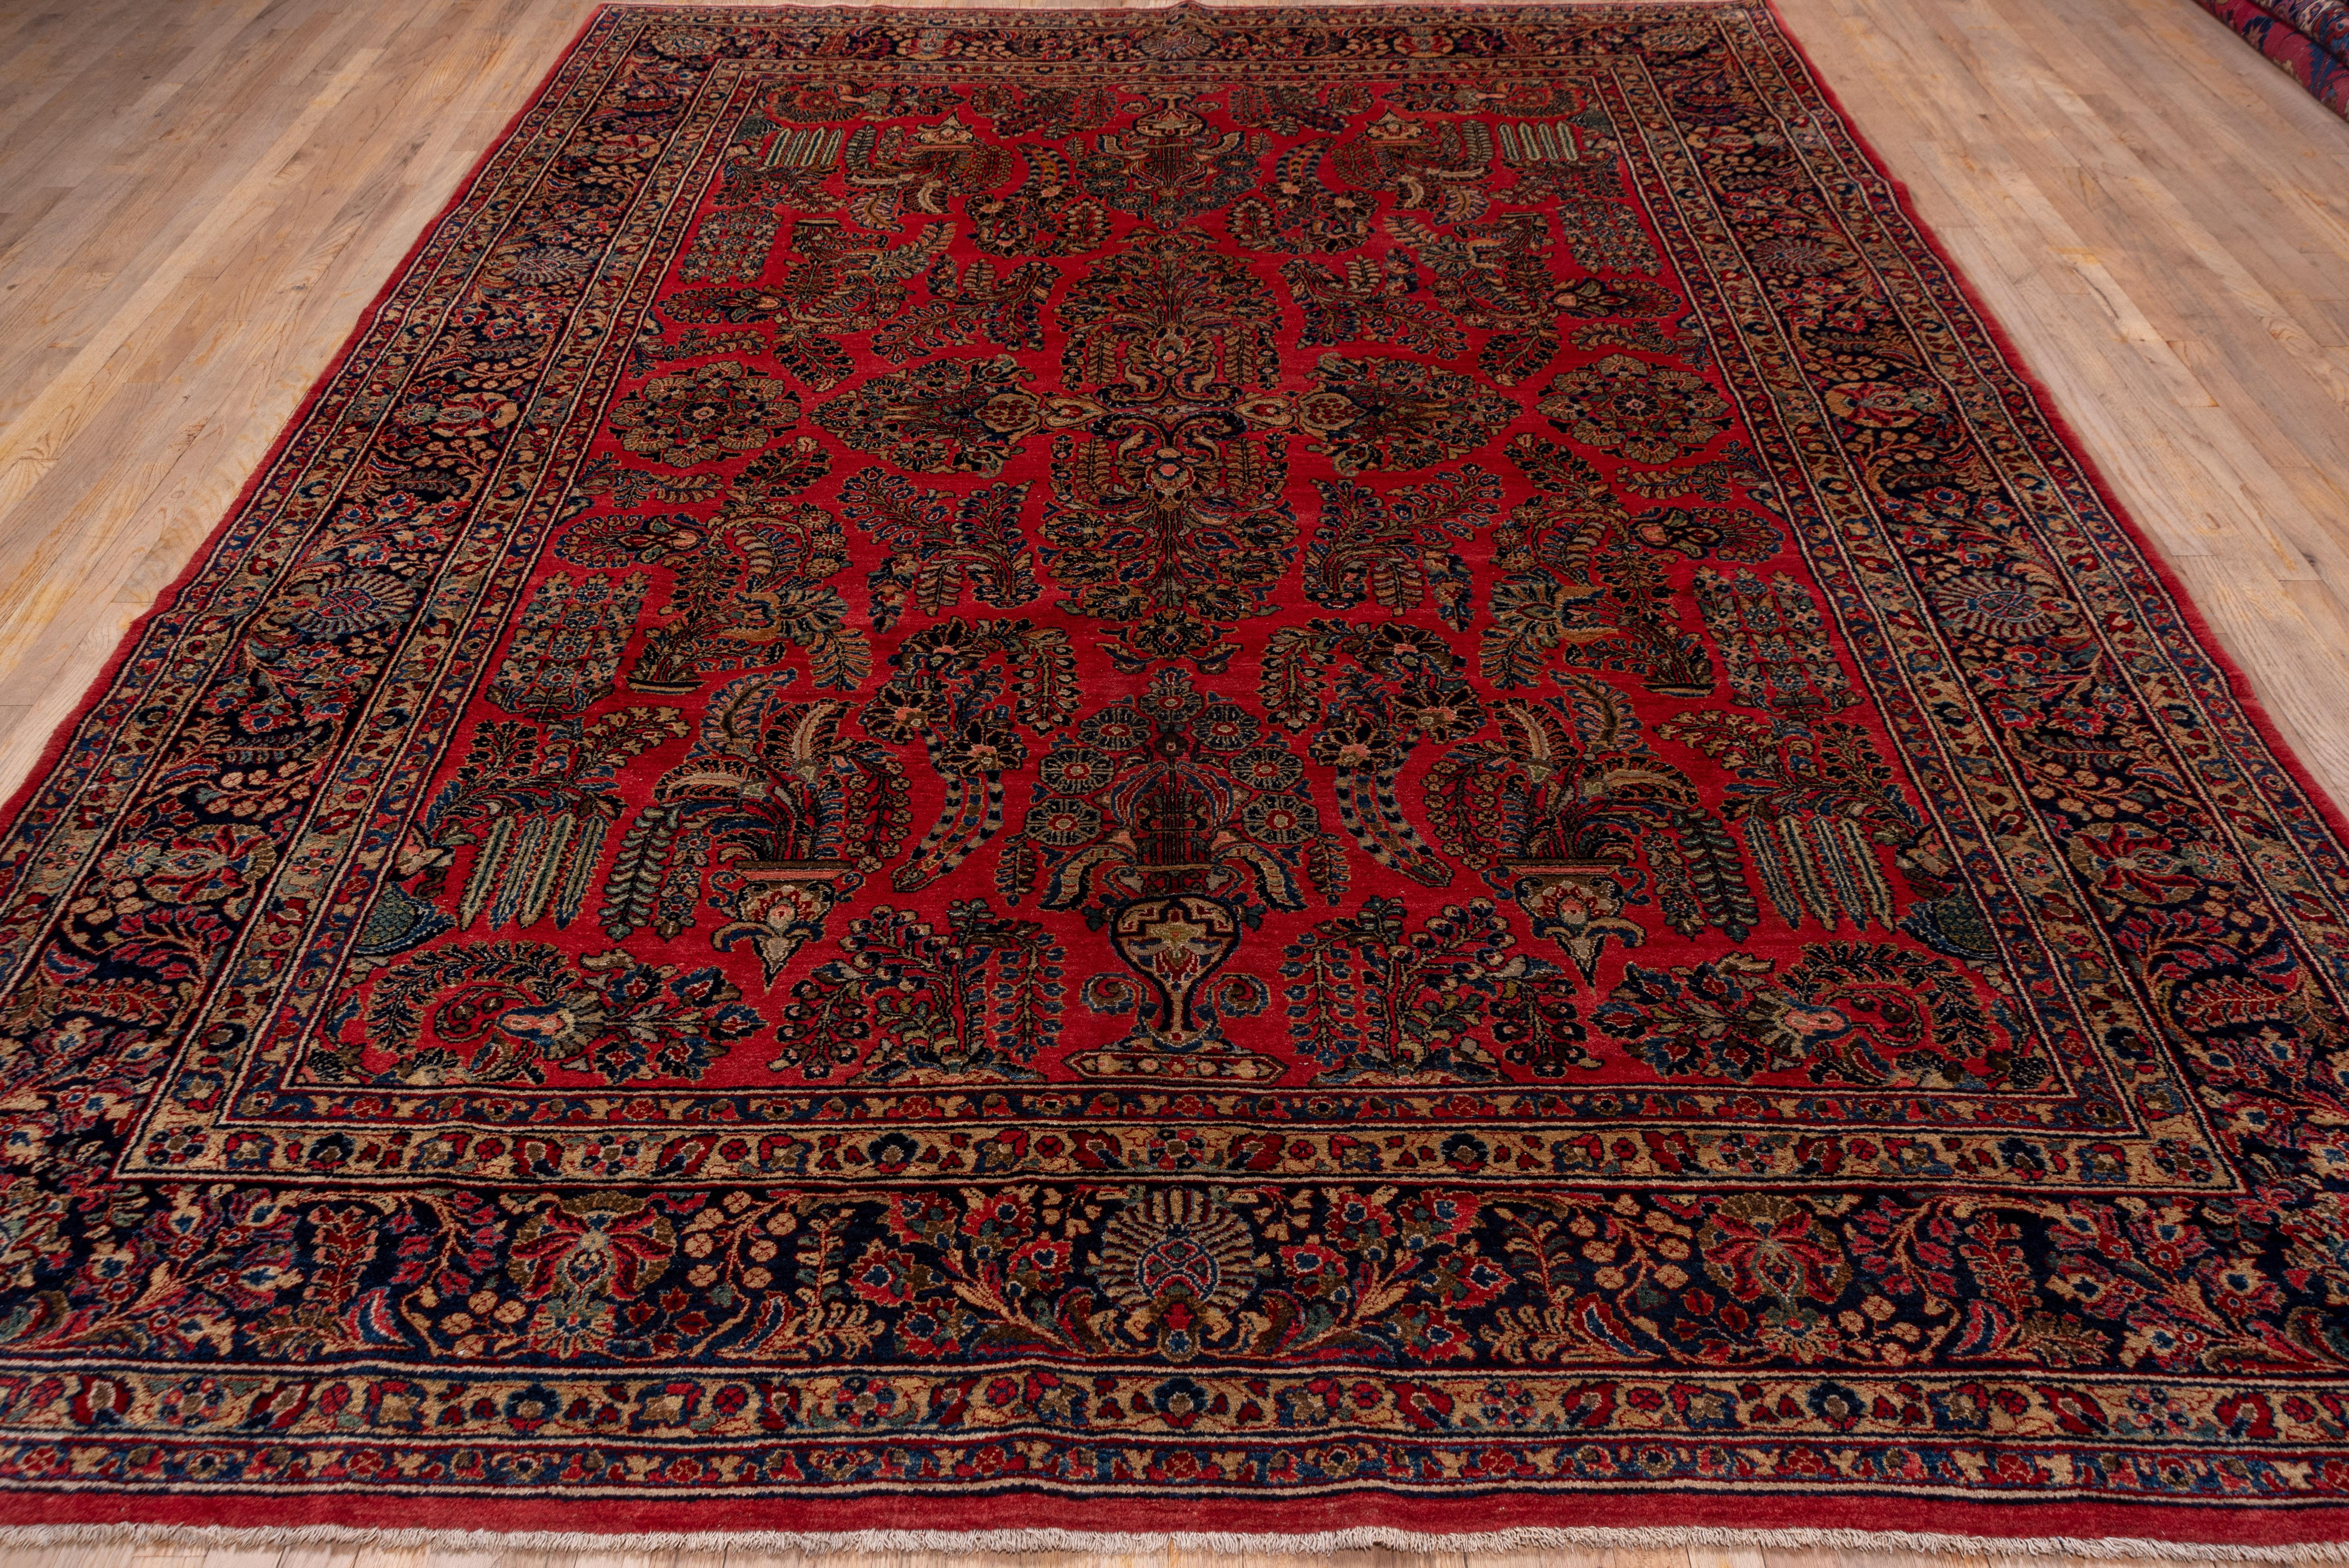 Hand-Knotted 1930s Antique Persian Sarouk Rug, Allover Red Field